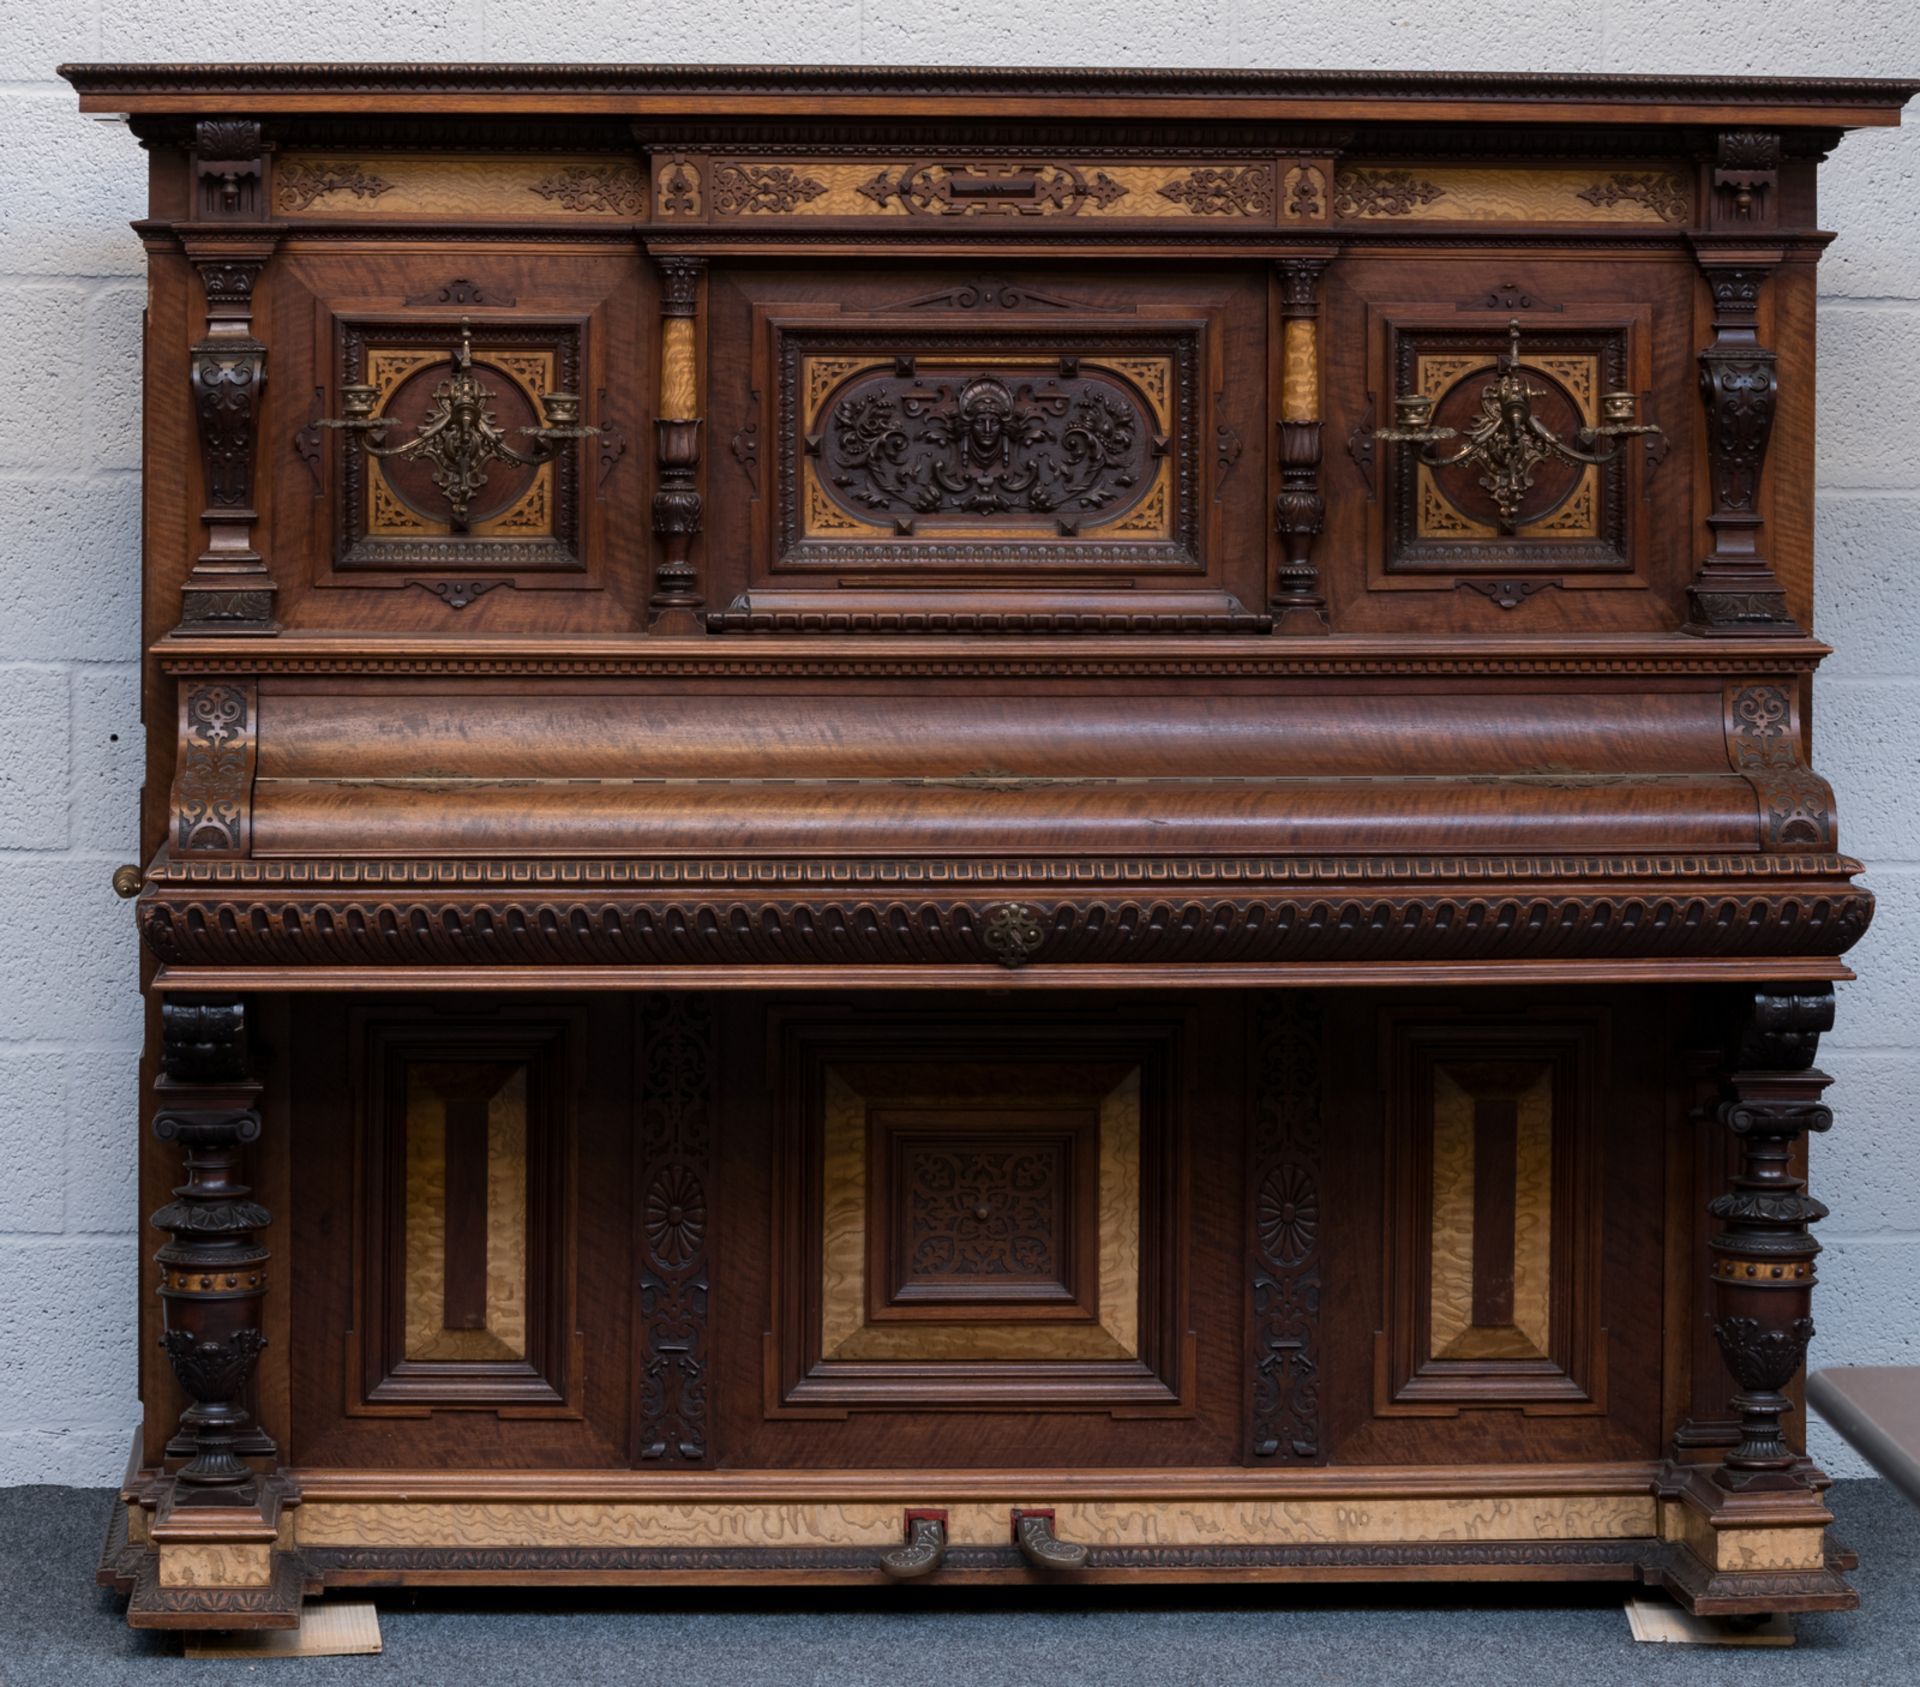 A fine richely carved american walnut and sicamore upright concert piano, Knauss, Coblenz - Image 2 of 7